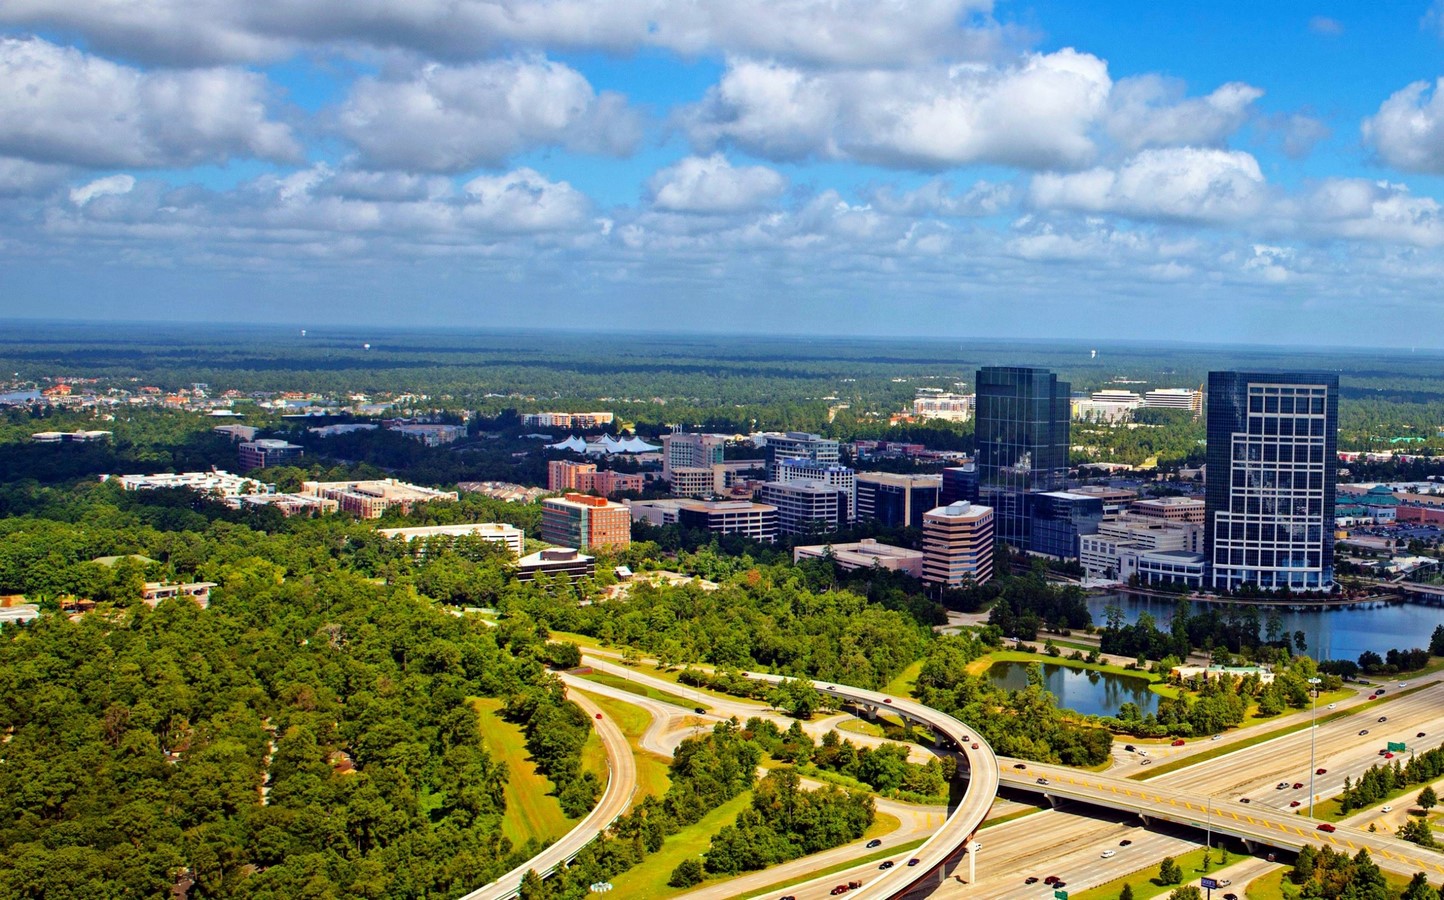 The Woodlands_©https://mikeseder.com/skills-that-you-can-learn-in-the-real-estate-market/